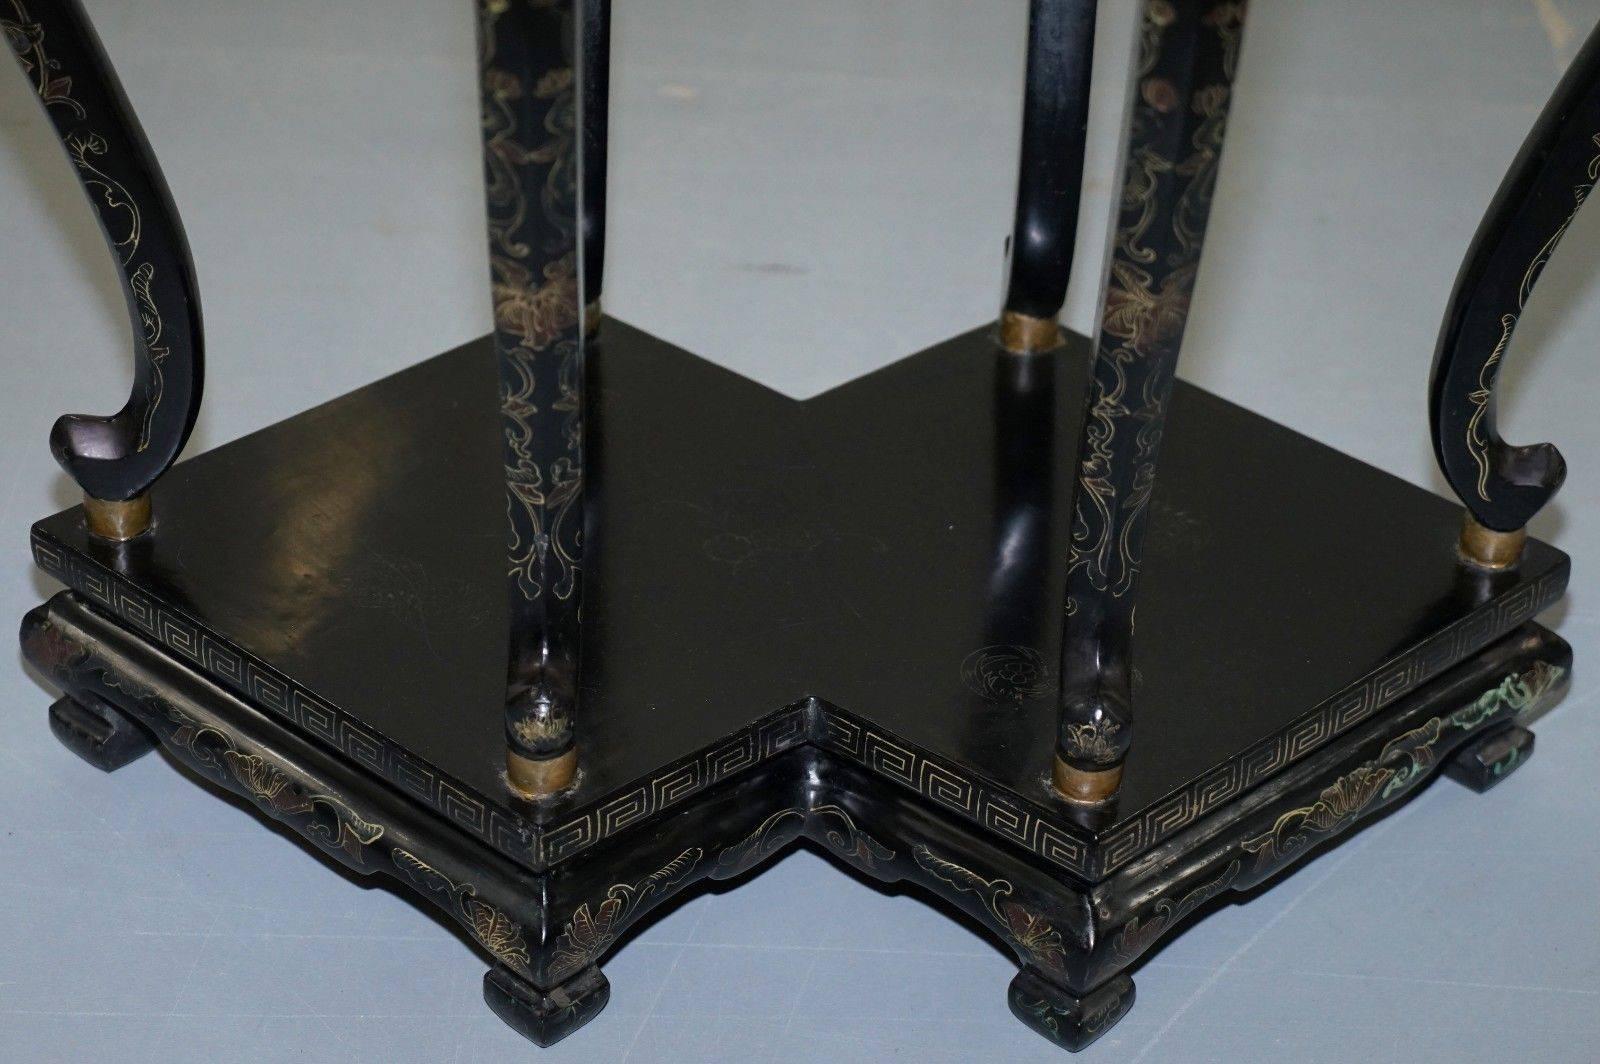 Chinese Export Hand-Painted 19th Century Chinese Chinoiserie Lacquered Jardinière Plant Stand